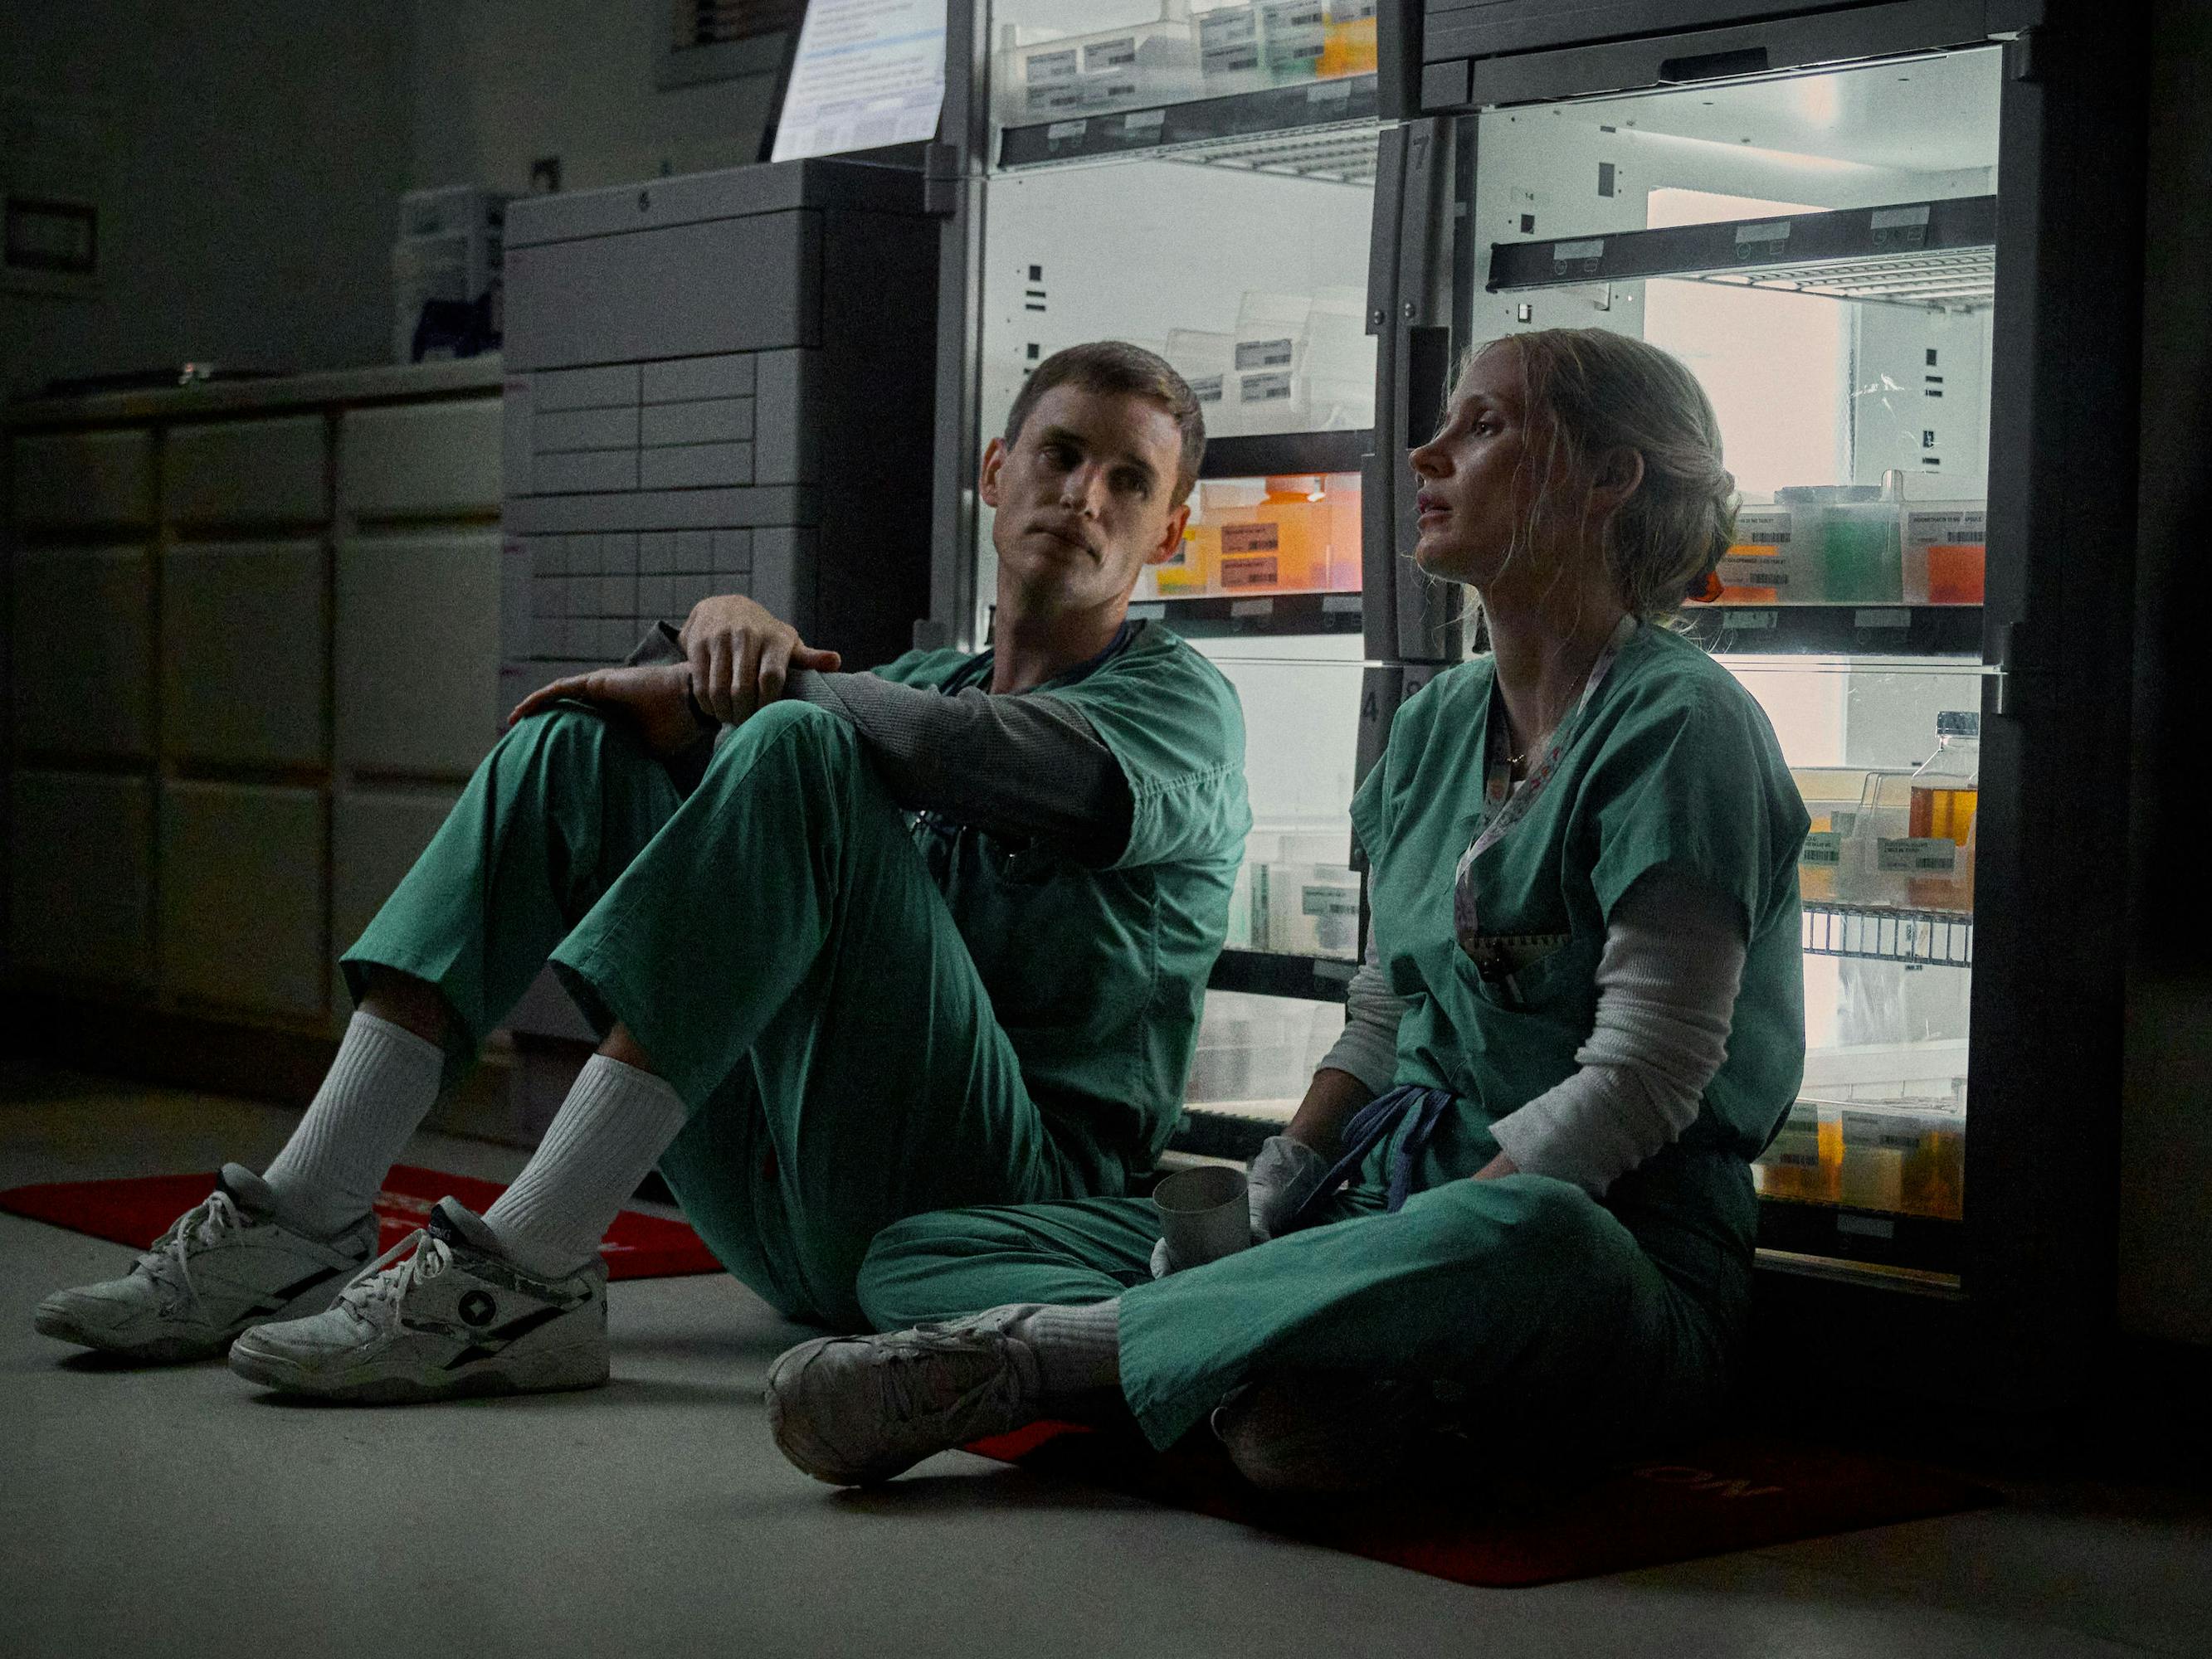 Charlie Cullen (Eddie Redmayne) and Amy Loughren (Jessica Chastain) sit on the ground of the hospital.  